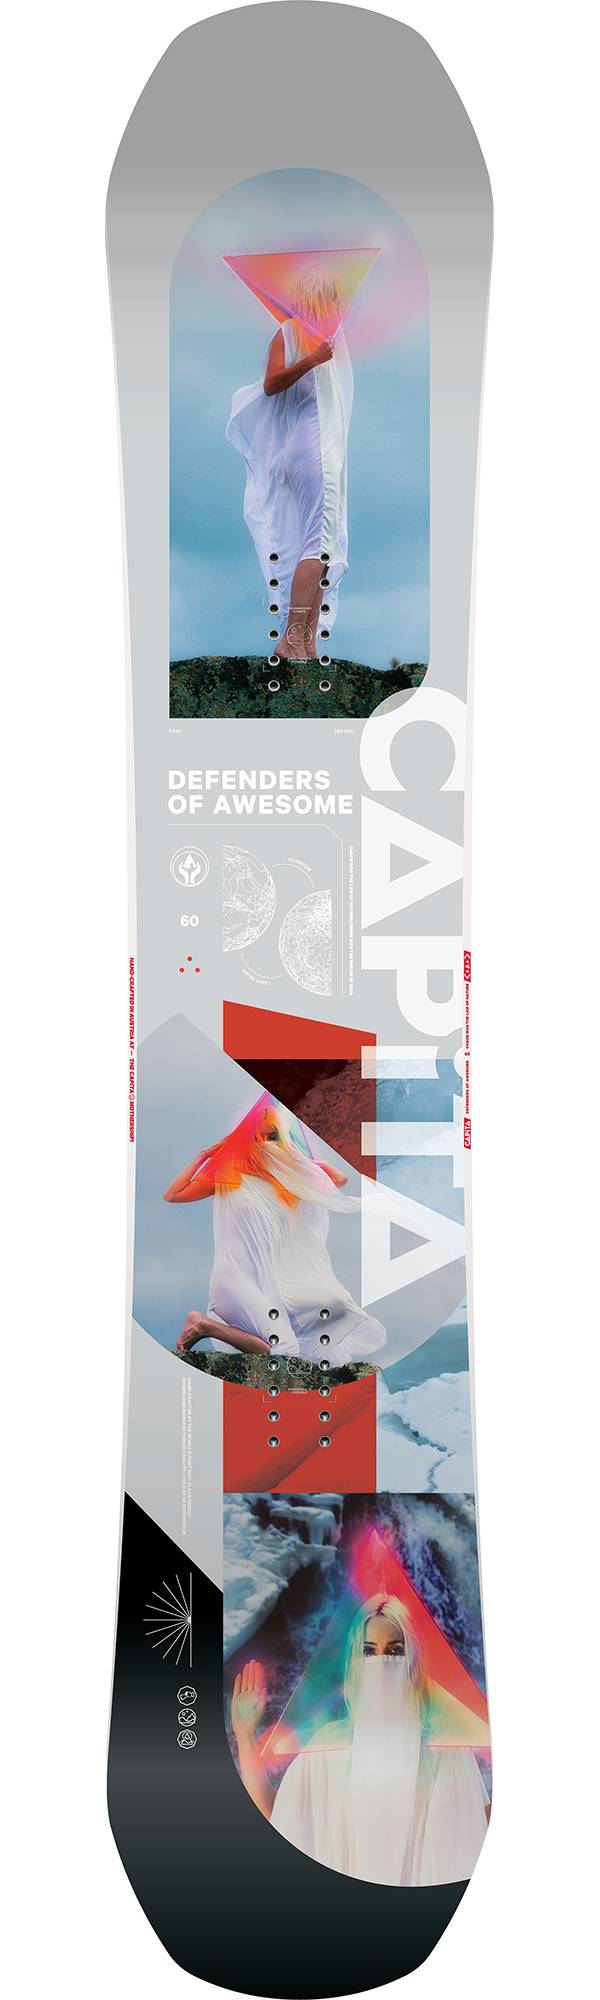 CAPiTA Defenders of Awesome Snowboard | Publiclands